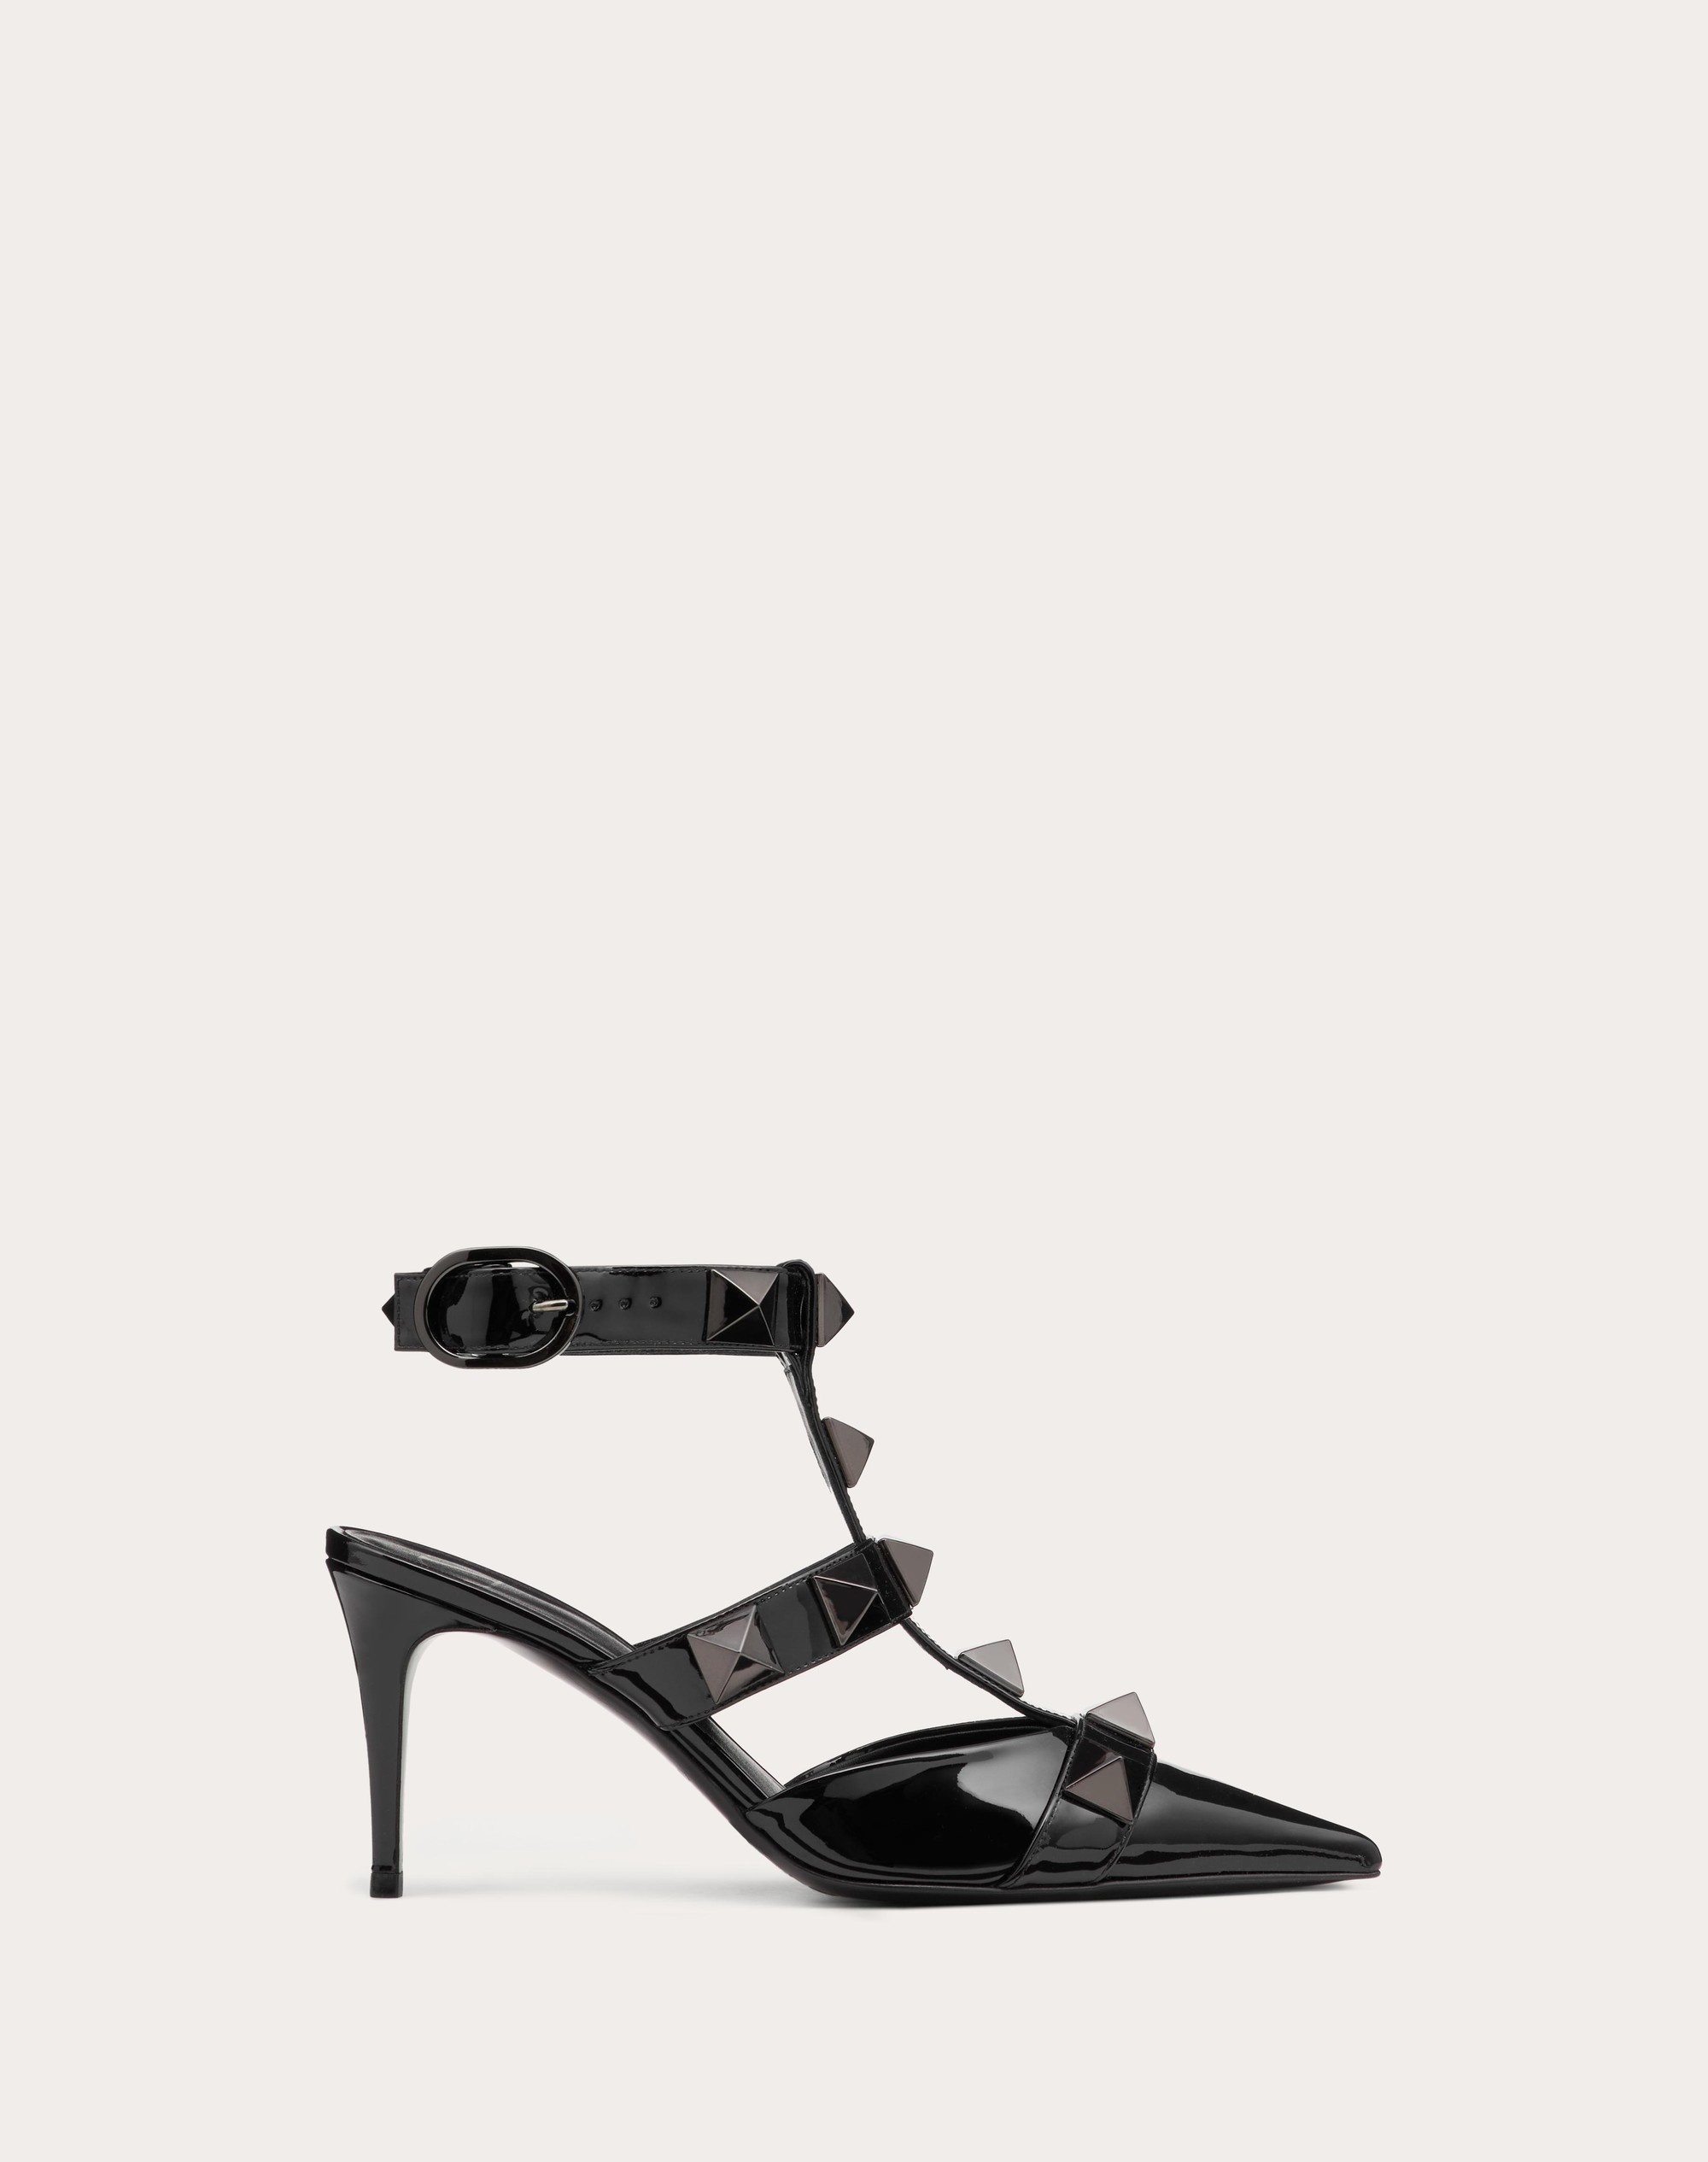 ROMAN STUD PUMP IN PATENT-LEATHER AND TONAL STUDS 80MM - 1